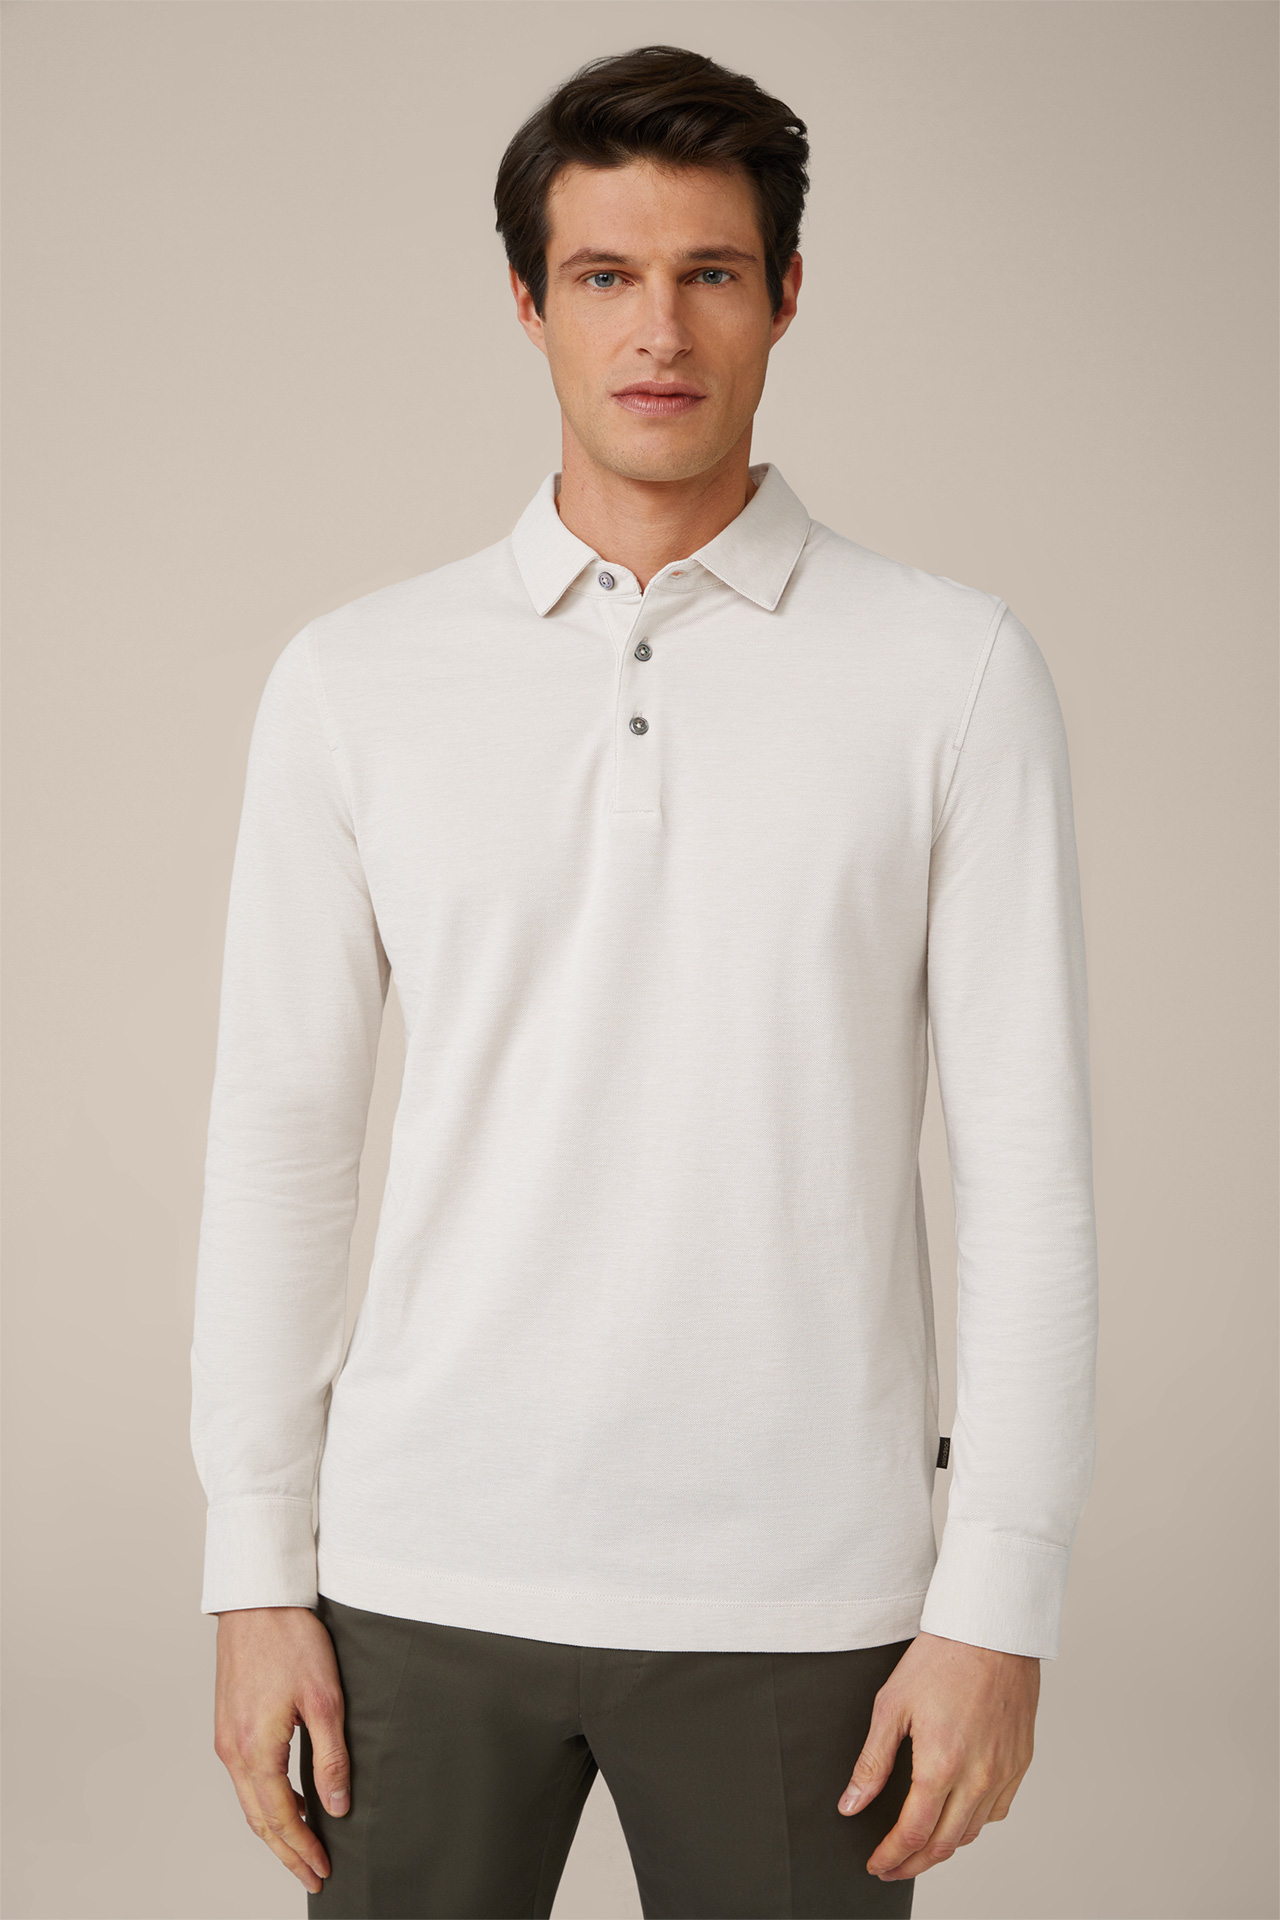 Patrizio Cotton Long-Sleeved Shirt in Beige